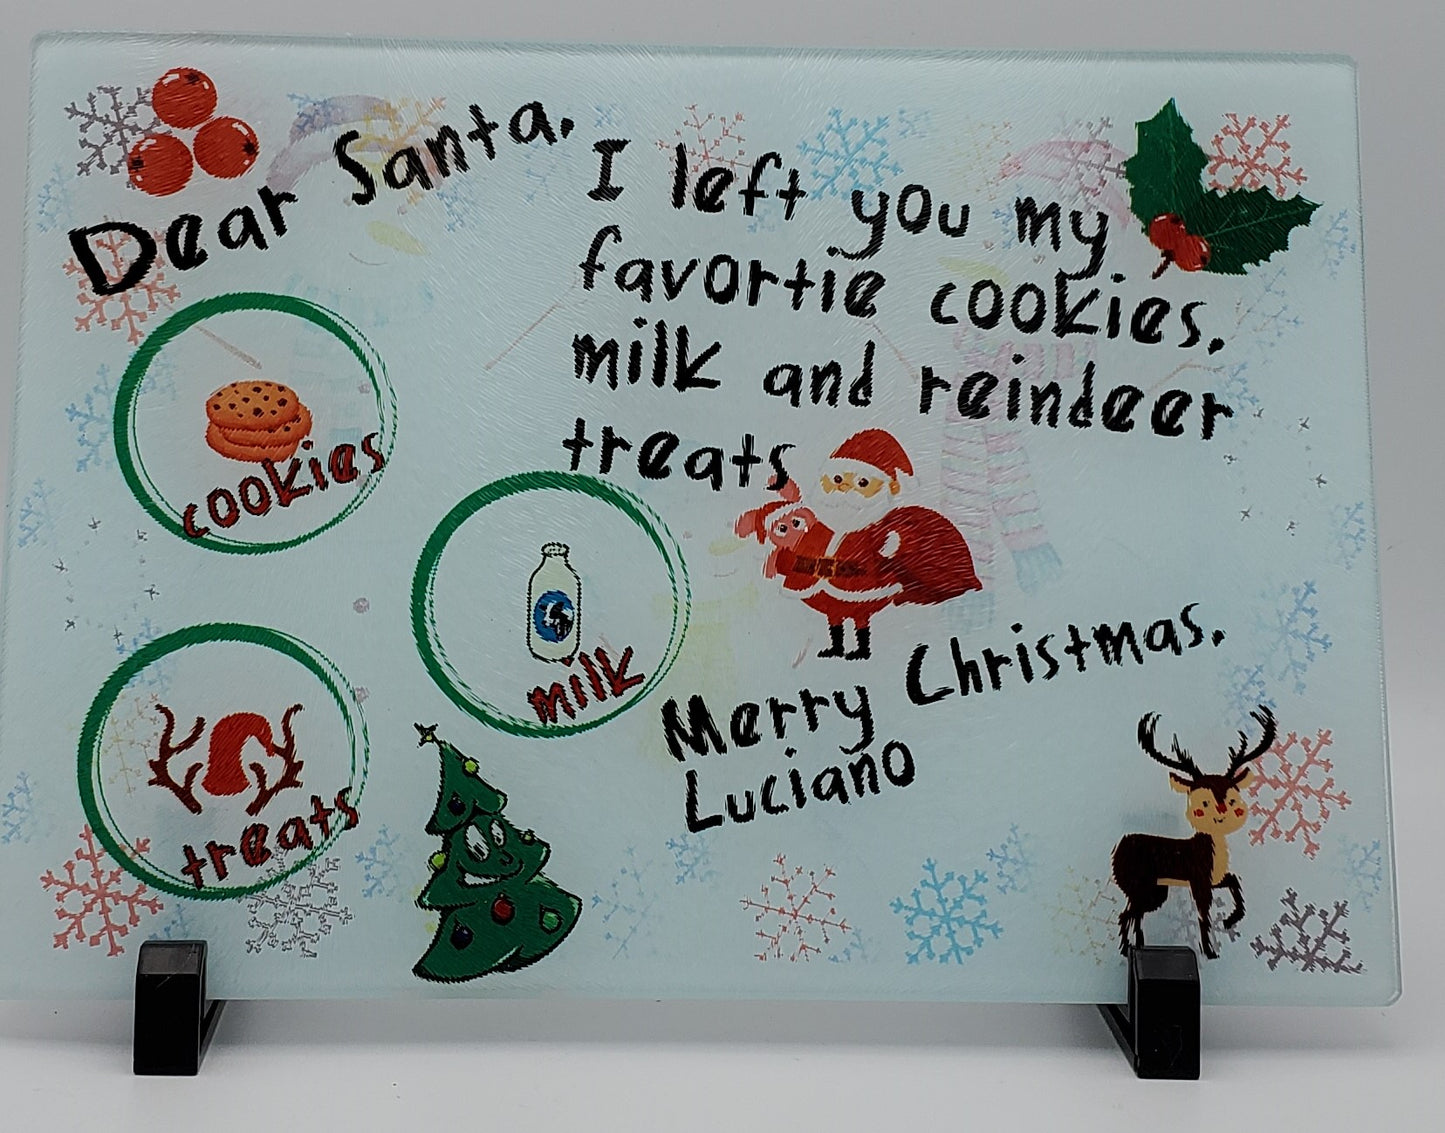 Personalized Santa Cookie Plate